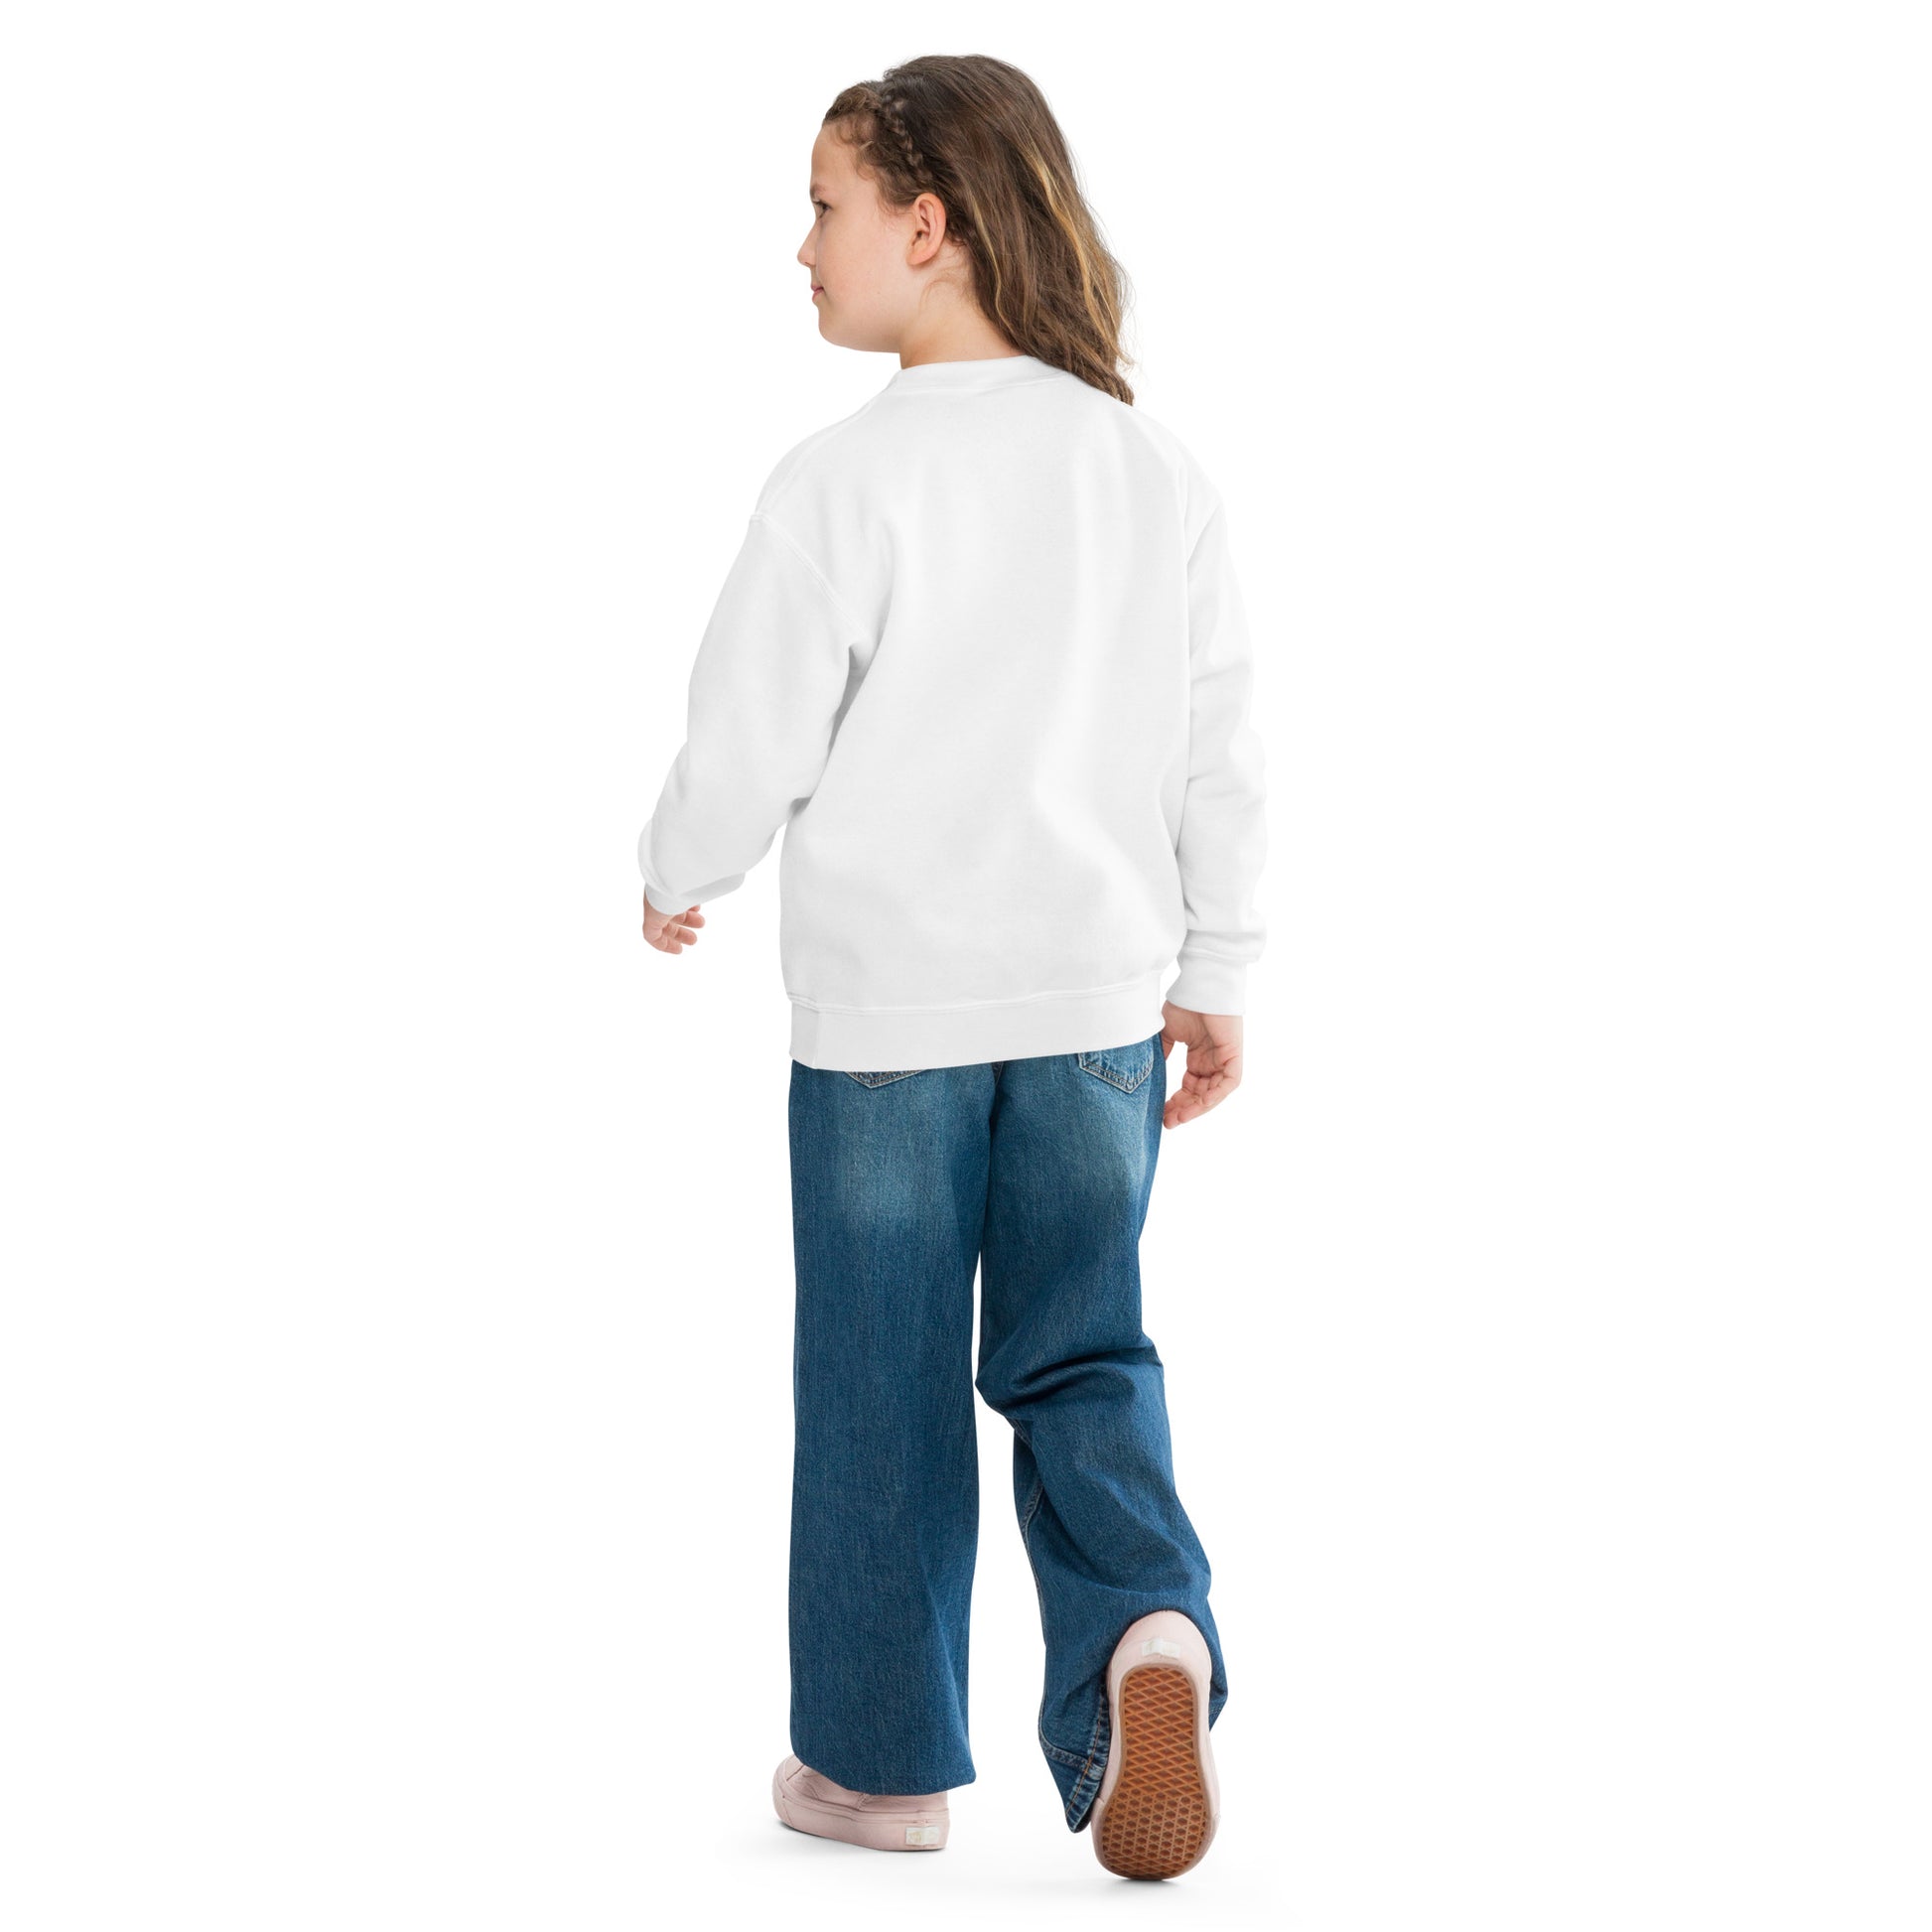 a little girl in a white sweatshirt and jeans